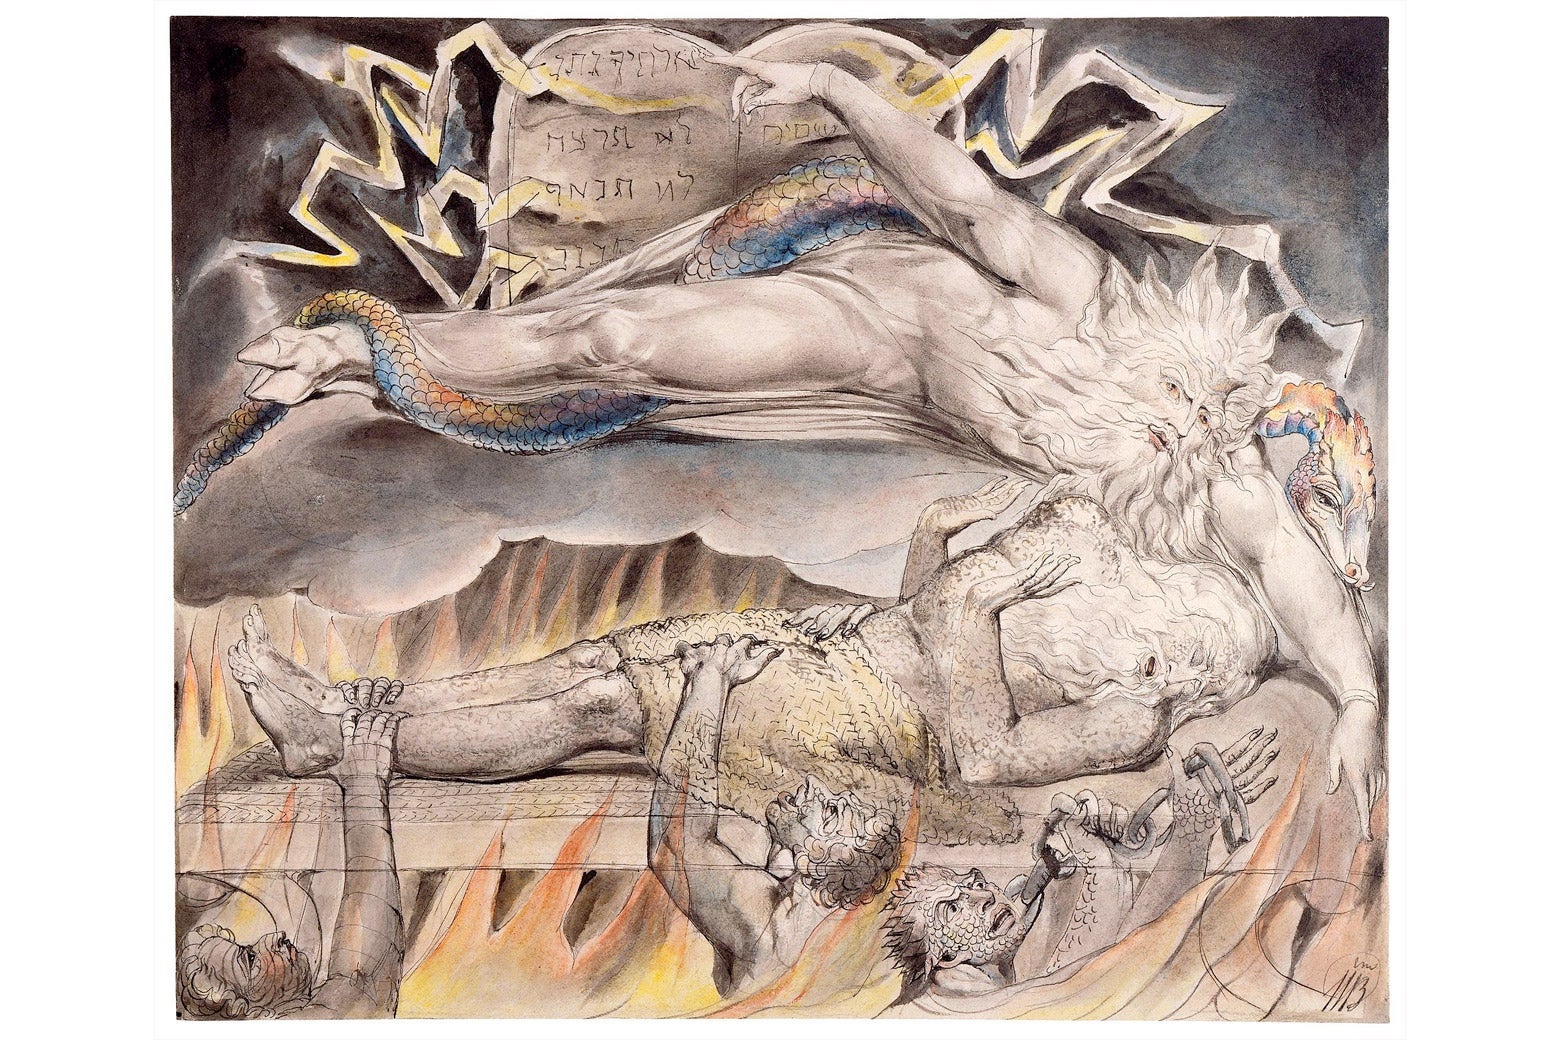 Watercolor of Job sleeping on a wooden bed raising his hands in protest as creatures grab at him from below and a cloven-hoofed demon hovers above him pointing at stone tablets